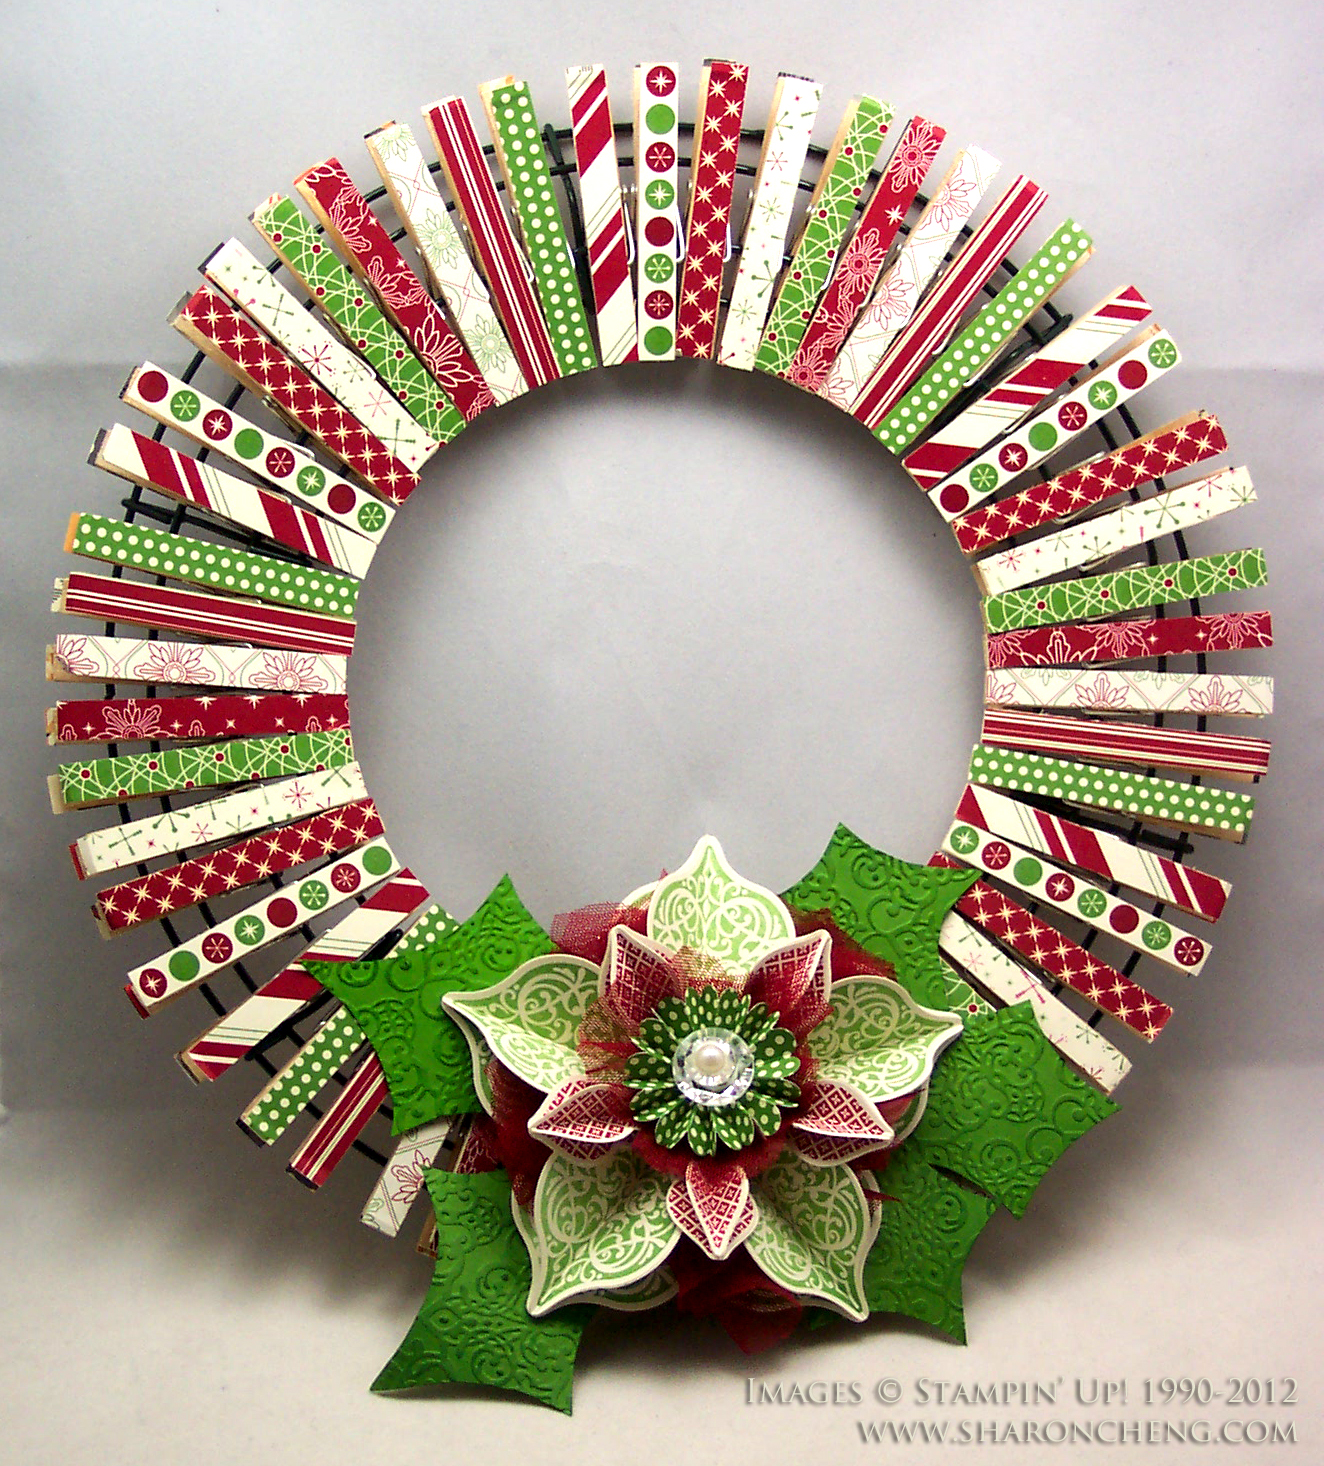 SHARING CREATIVITY and COMPANY Clothespin Wreath Valentine's Day Version